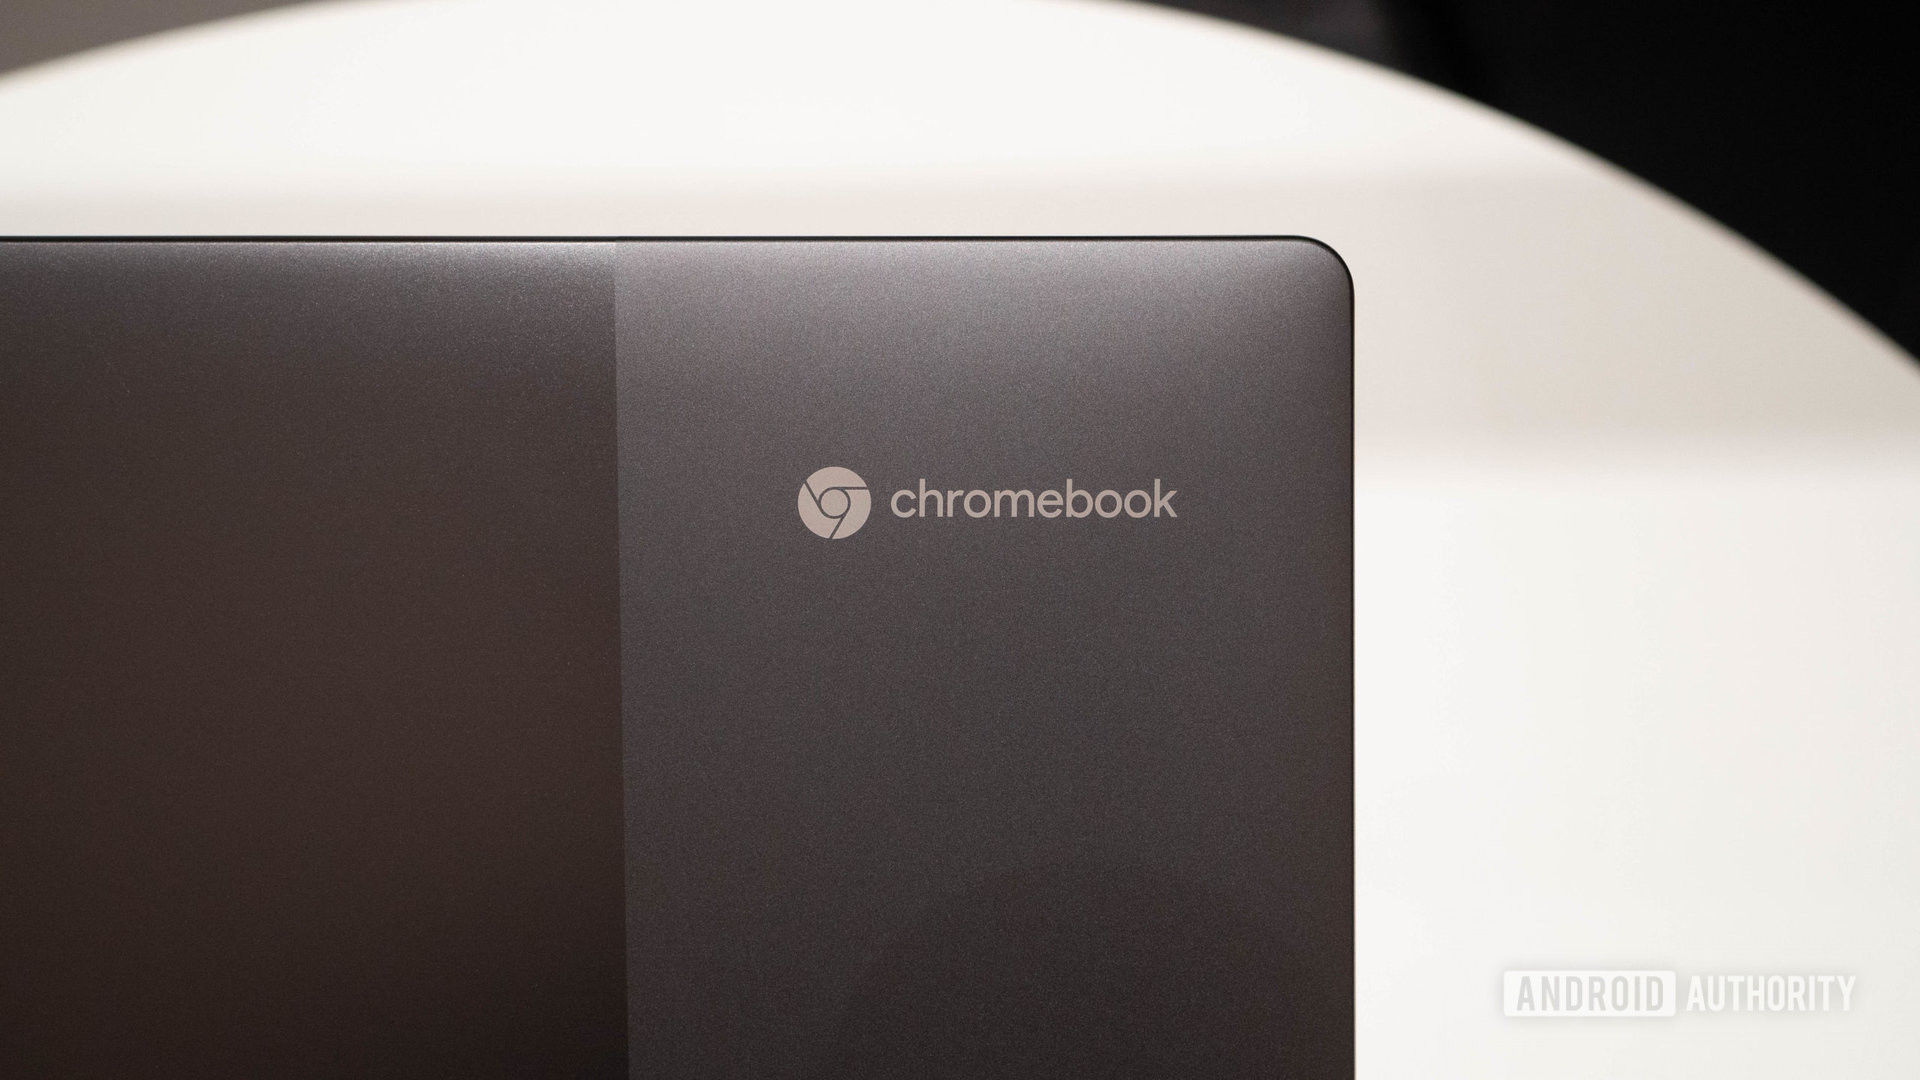 Save up to $130 on these Black Friday Chromebook deals